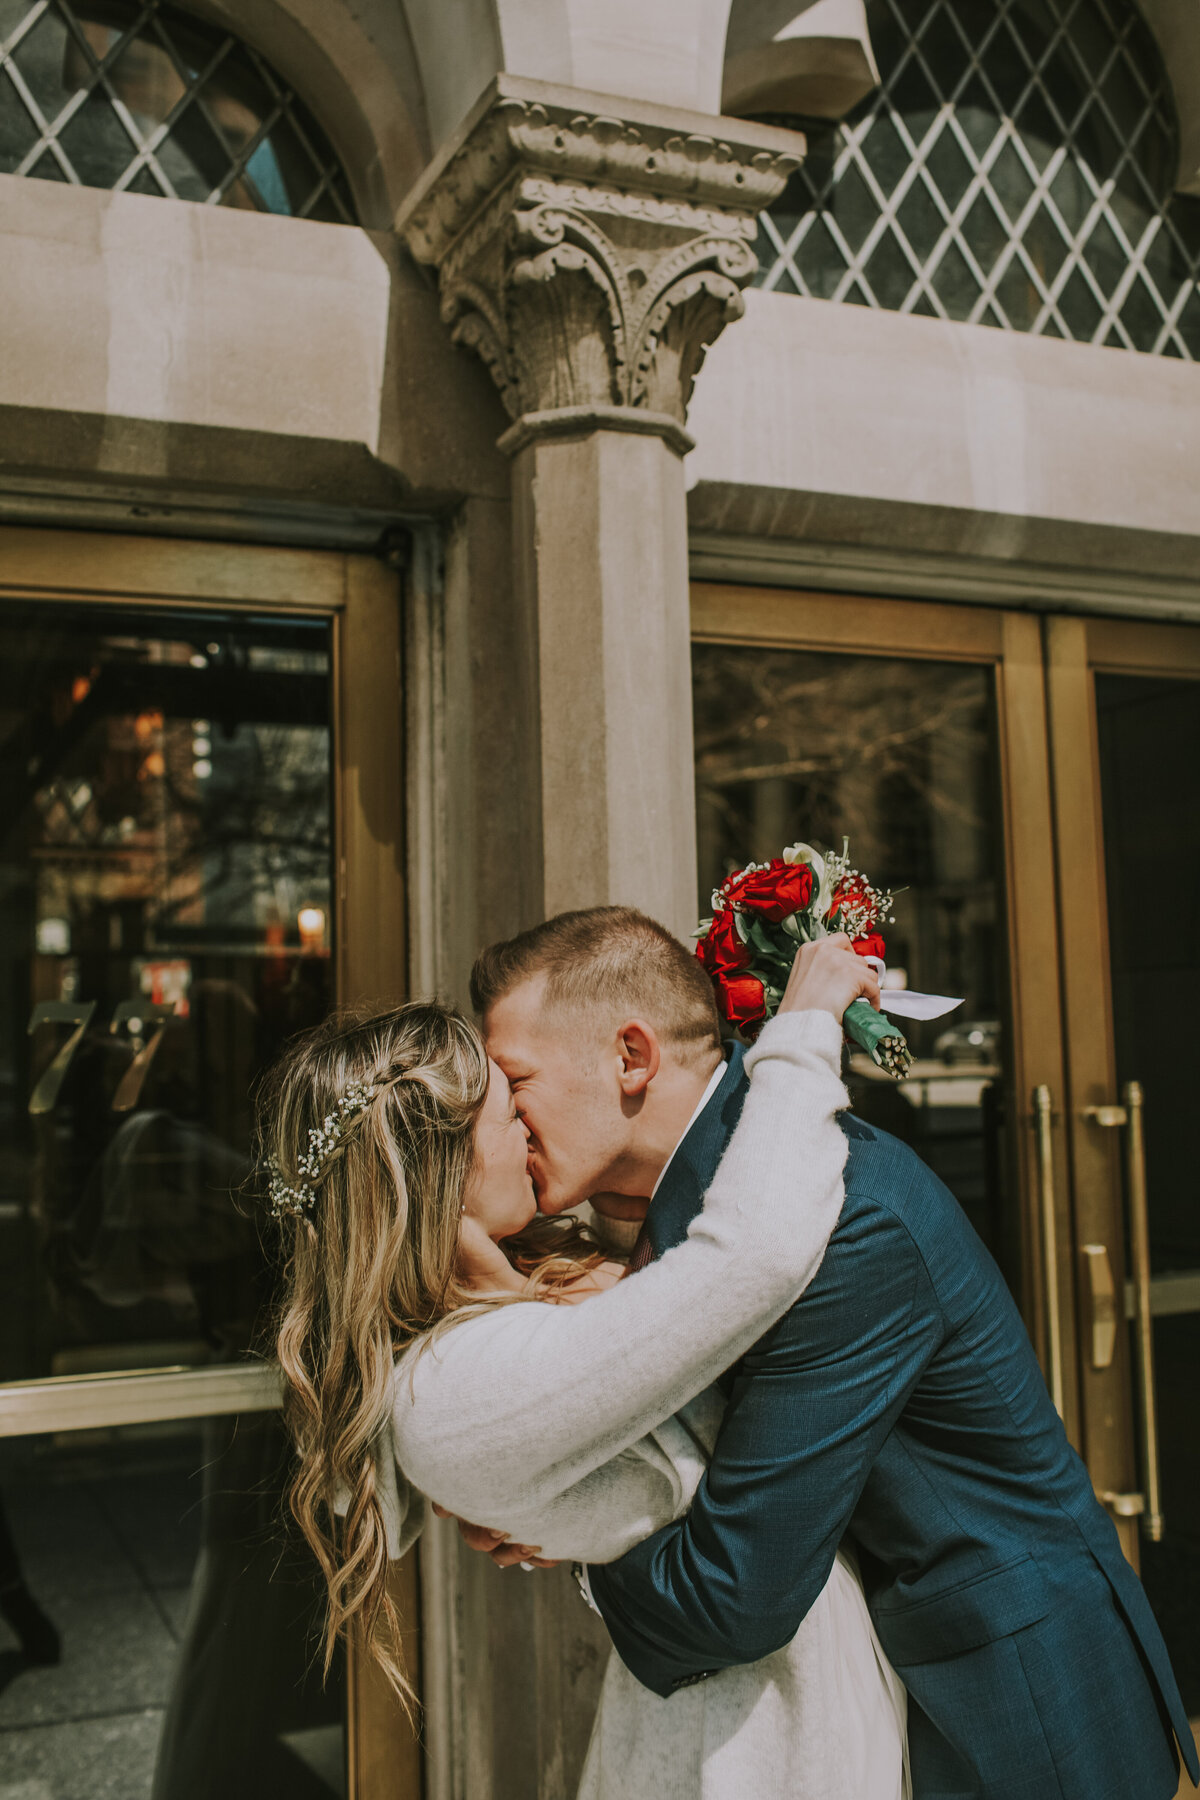 Emma & Vukasin Courthouse Wedding in Chicago March 2019 (283)